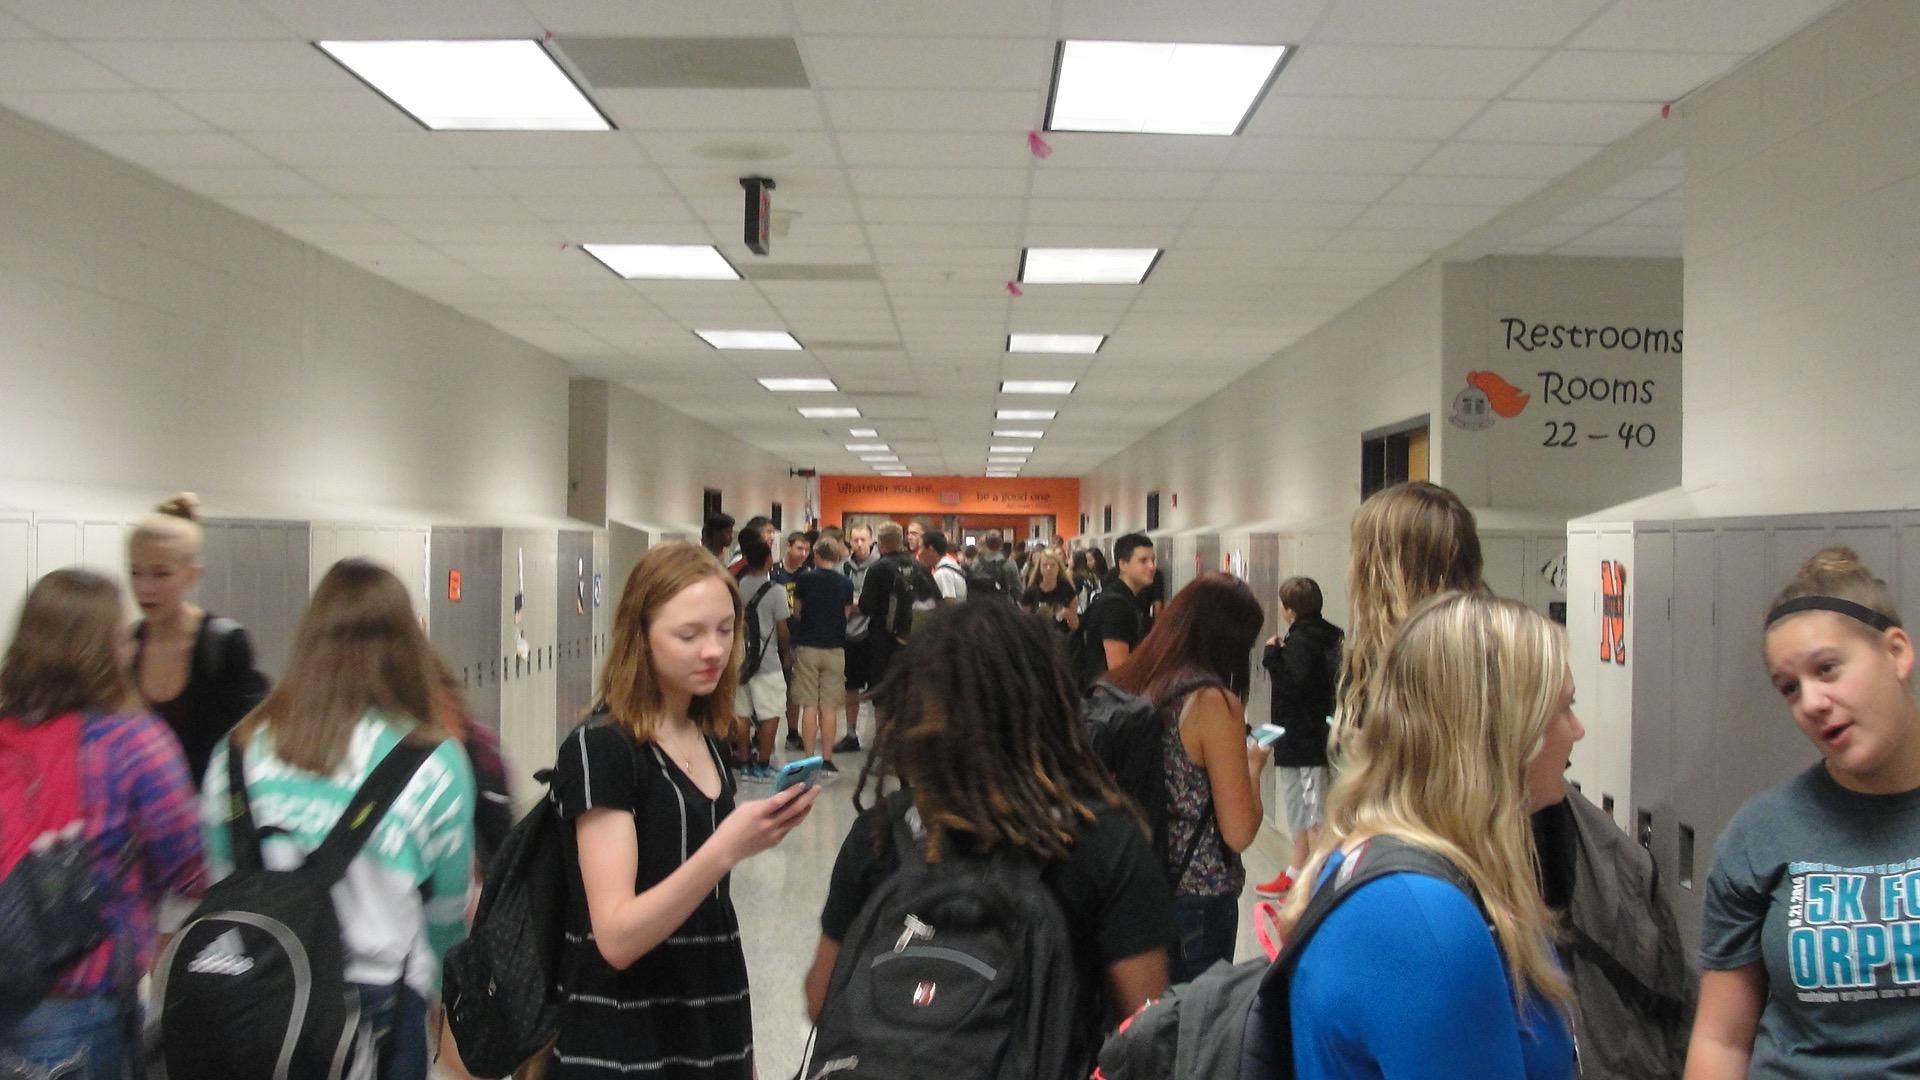 The senior hallway is filled with student before the first bell rings. (Sept. 21-25)